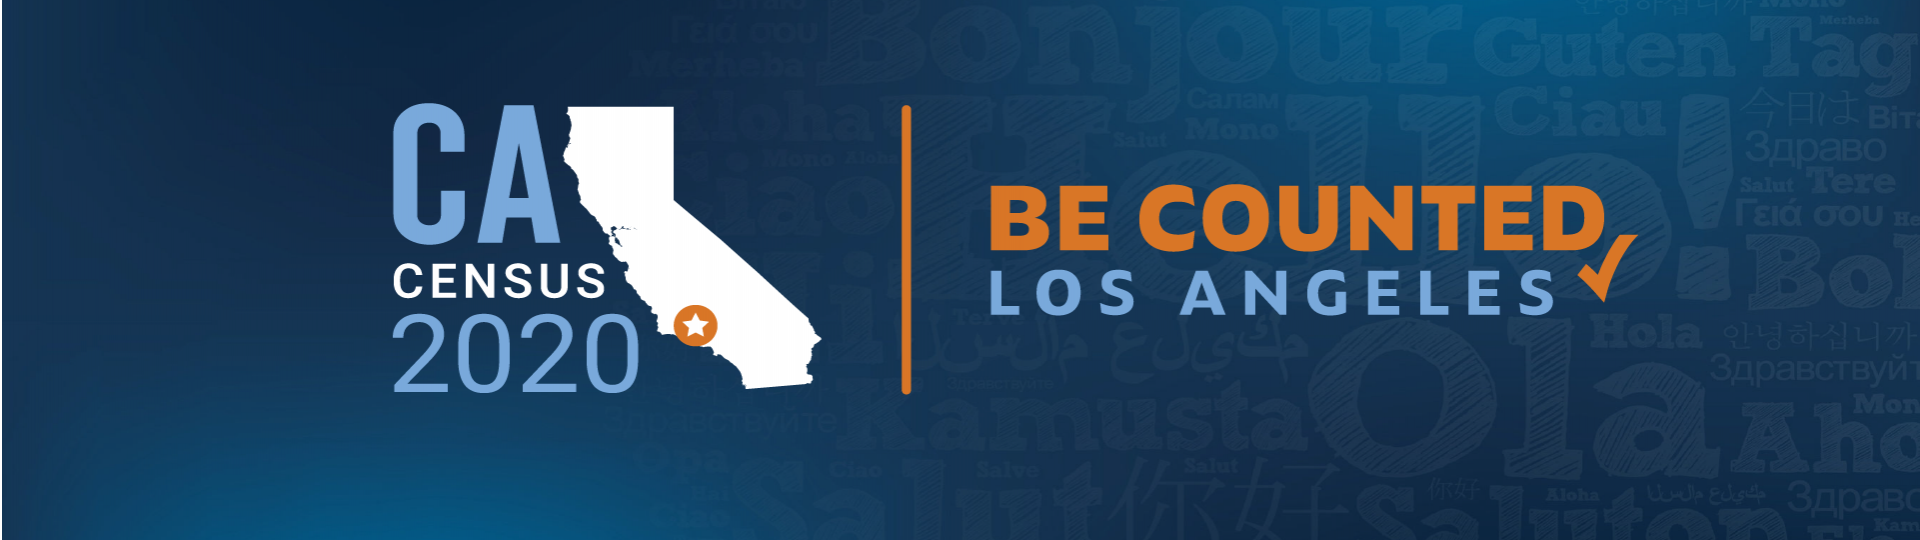 Banner of California Map Logo with text Census 2020 Be Counted Los Angeles.